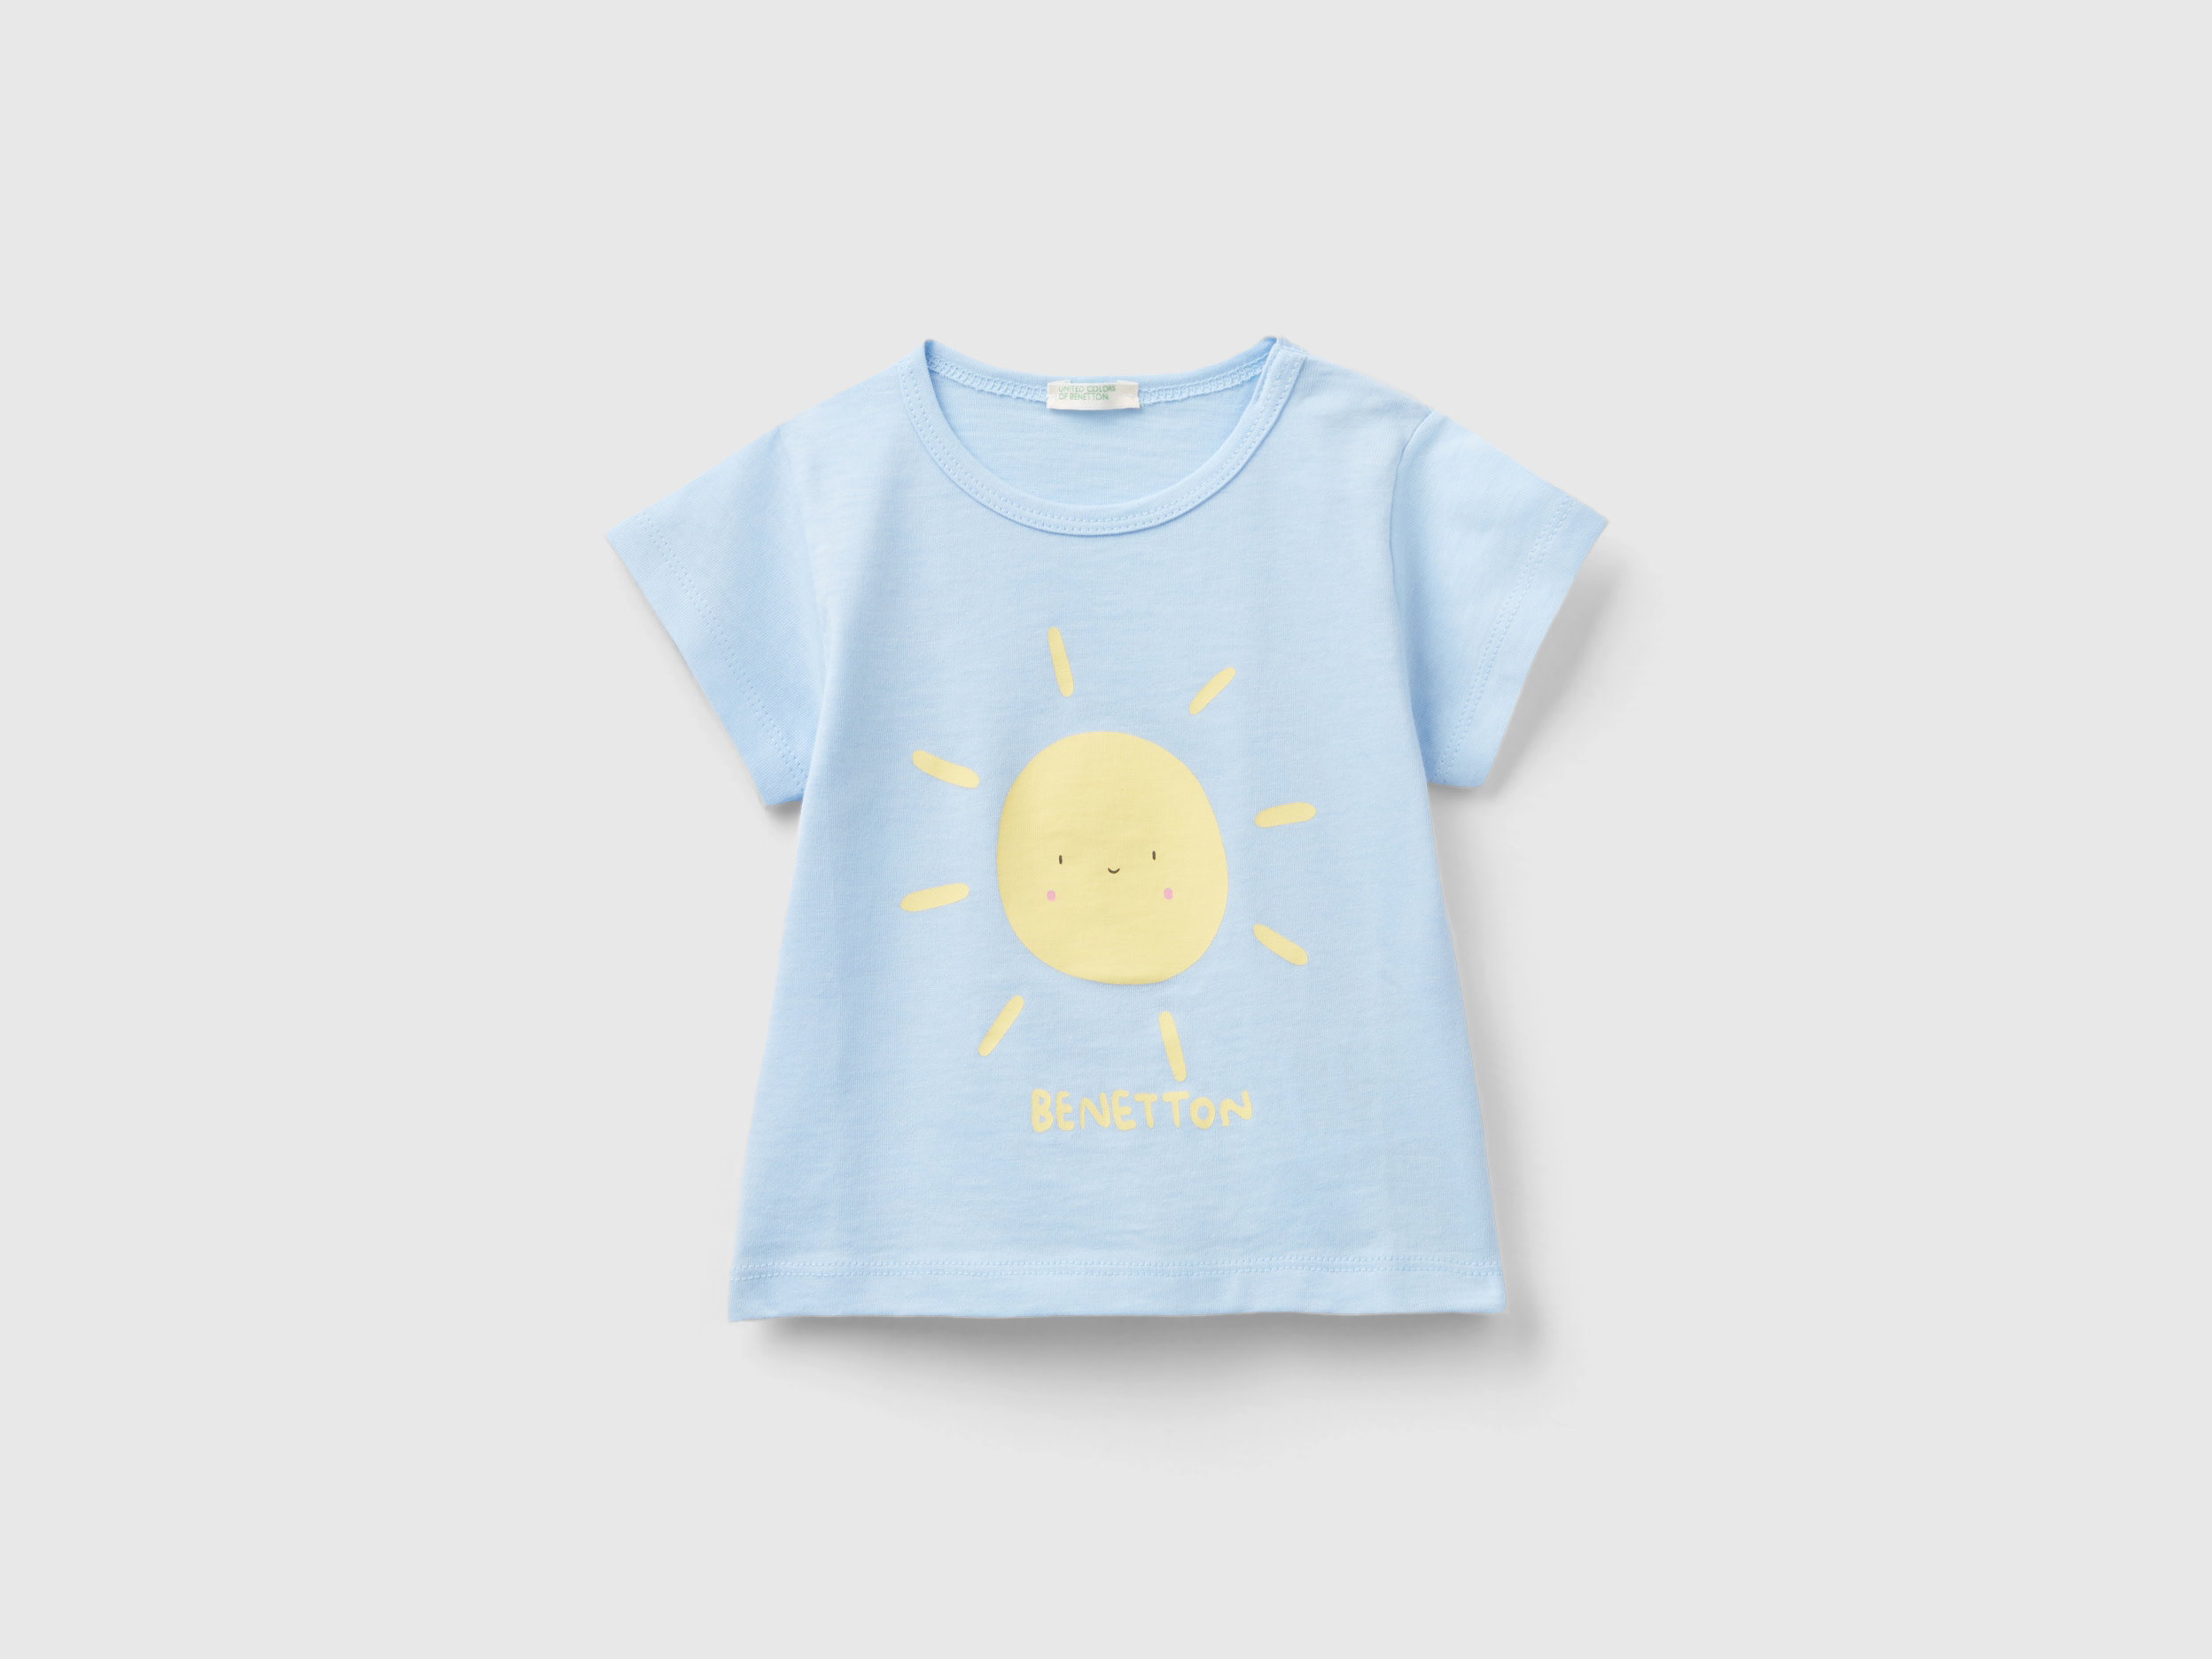 Image of Benetton, Organic Cotton T-shirt With Print, size 50, Sky Blue, Kids